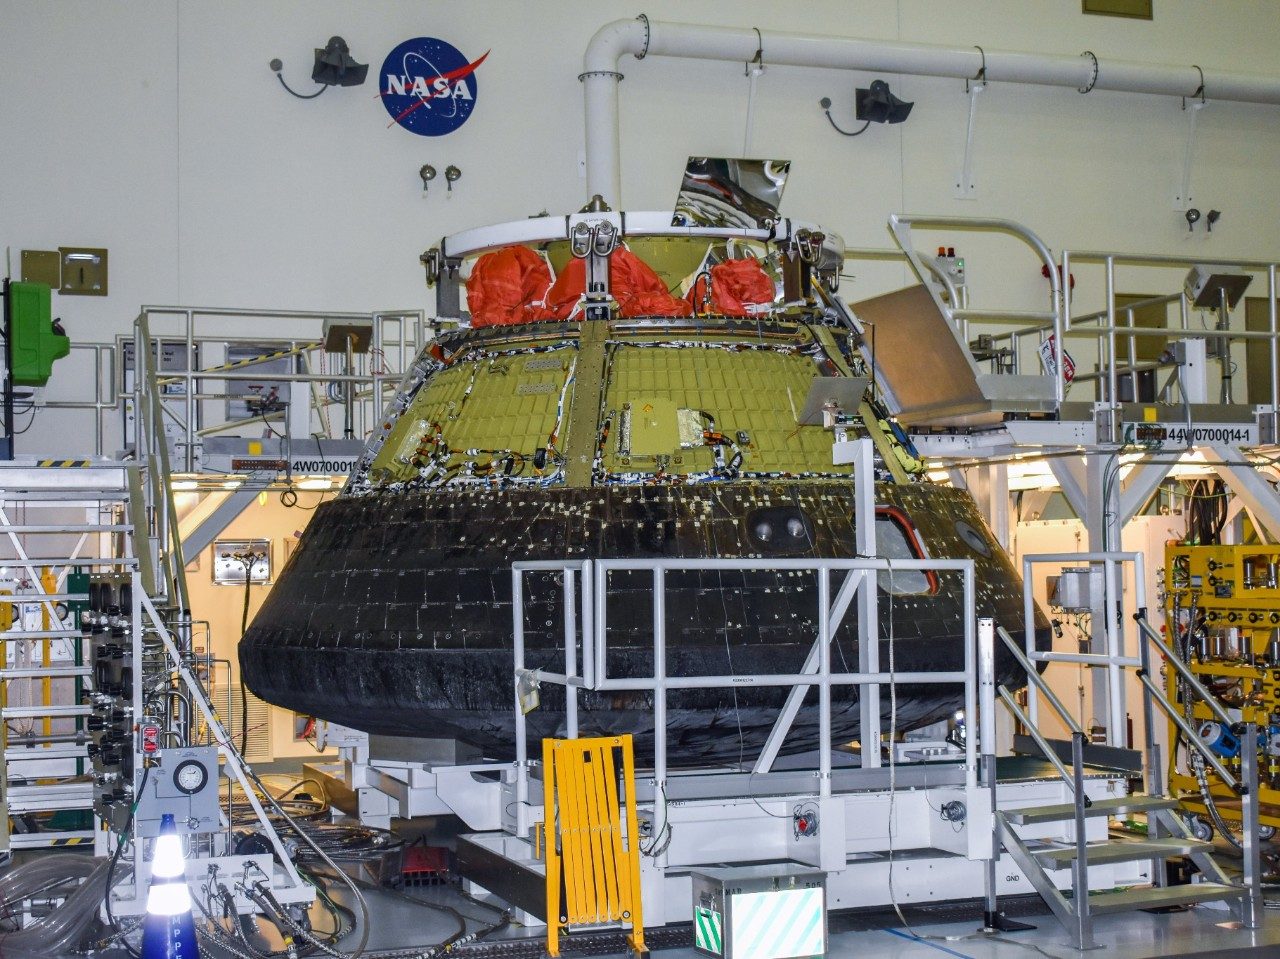 Orion undergoing disassembly during post mission checkout at Kenendy Space Center